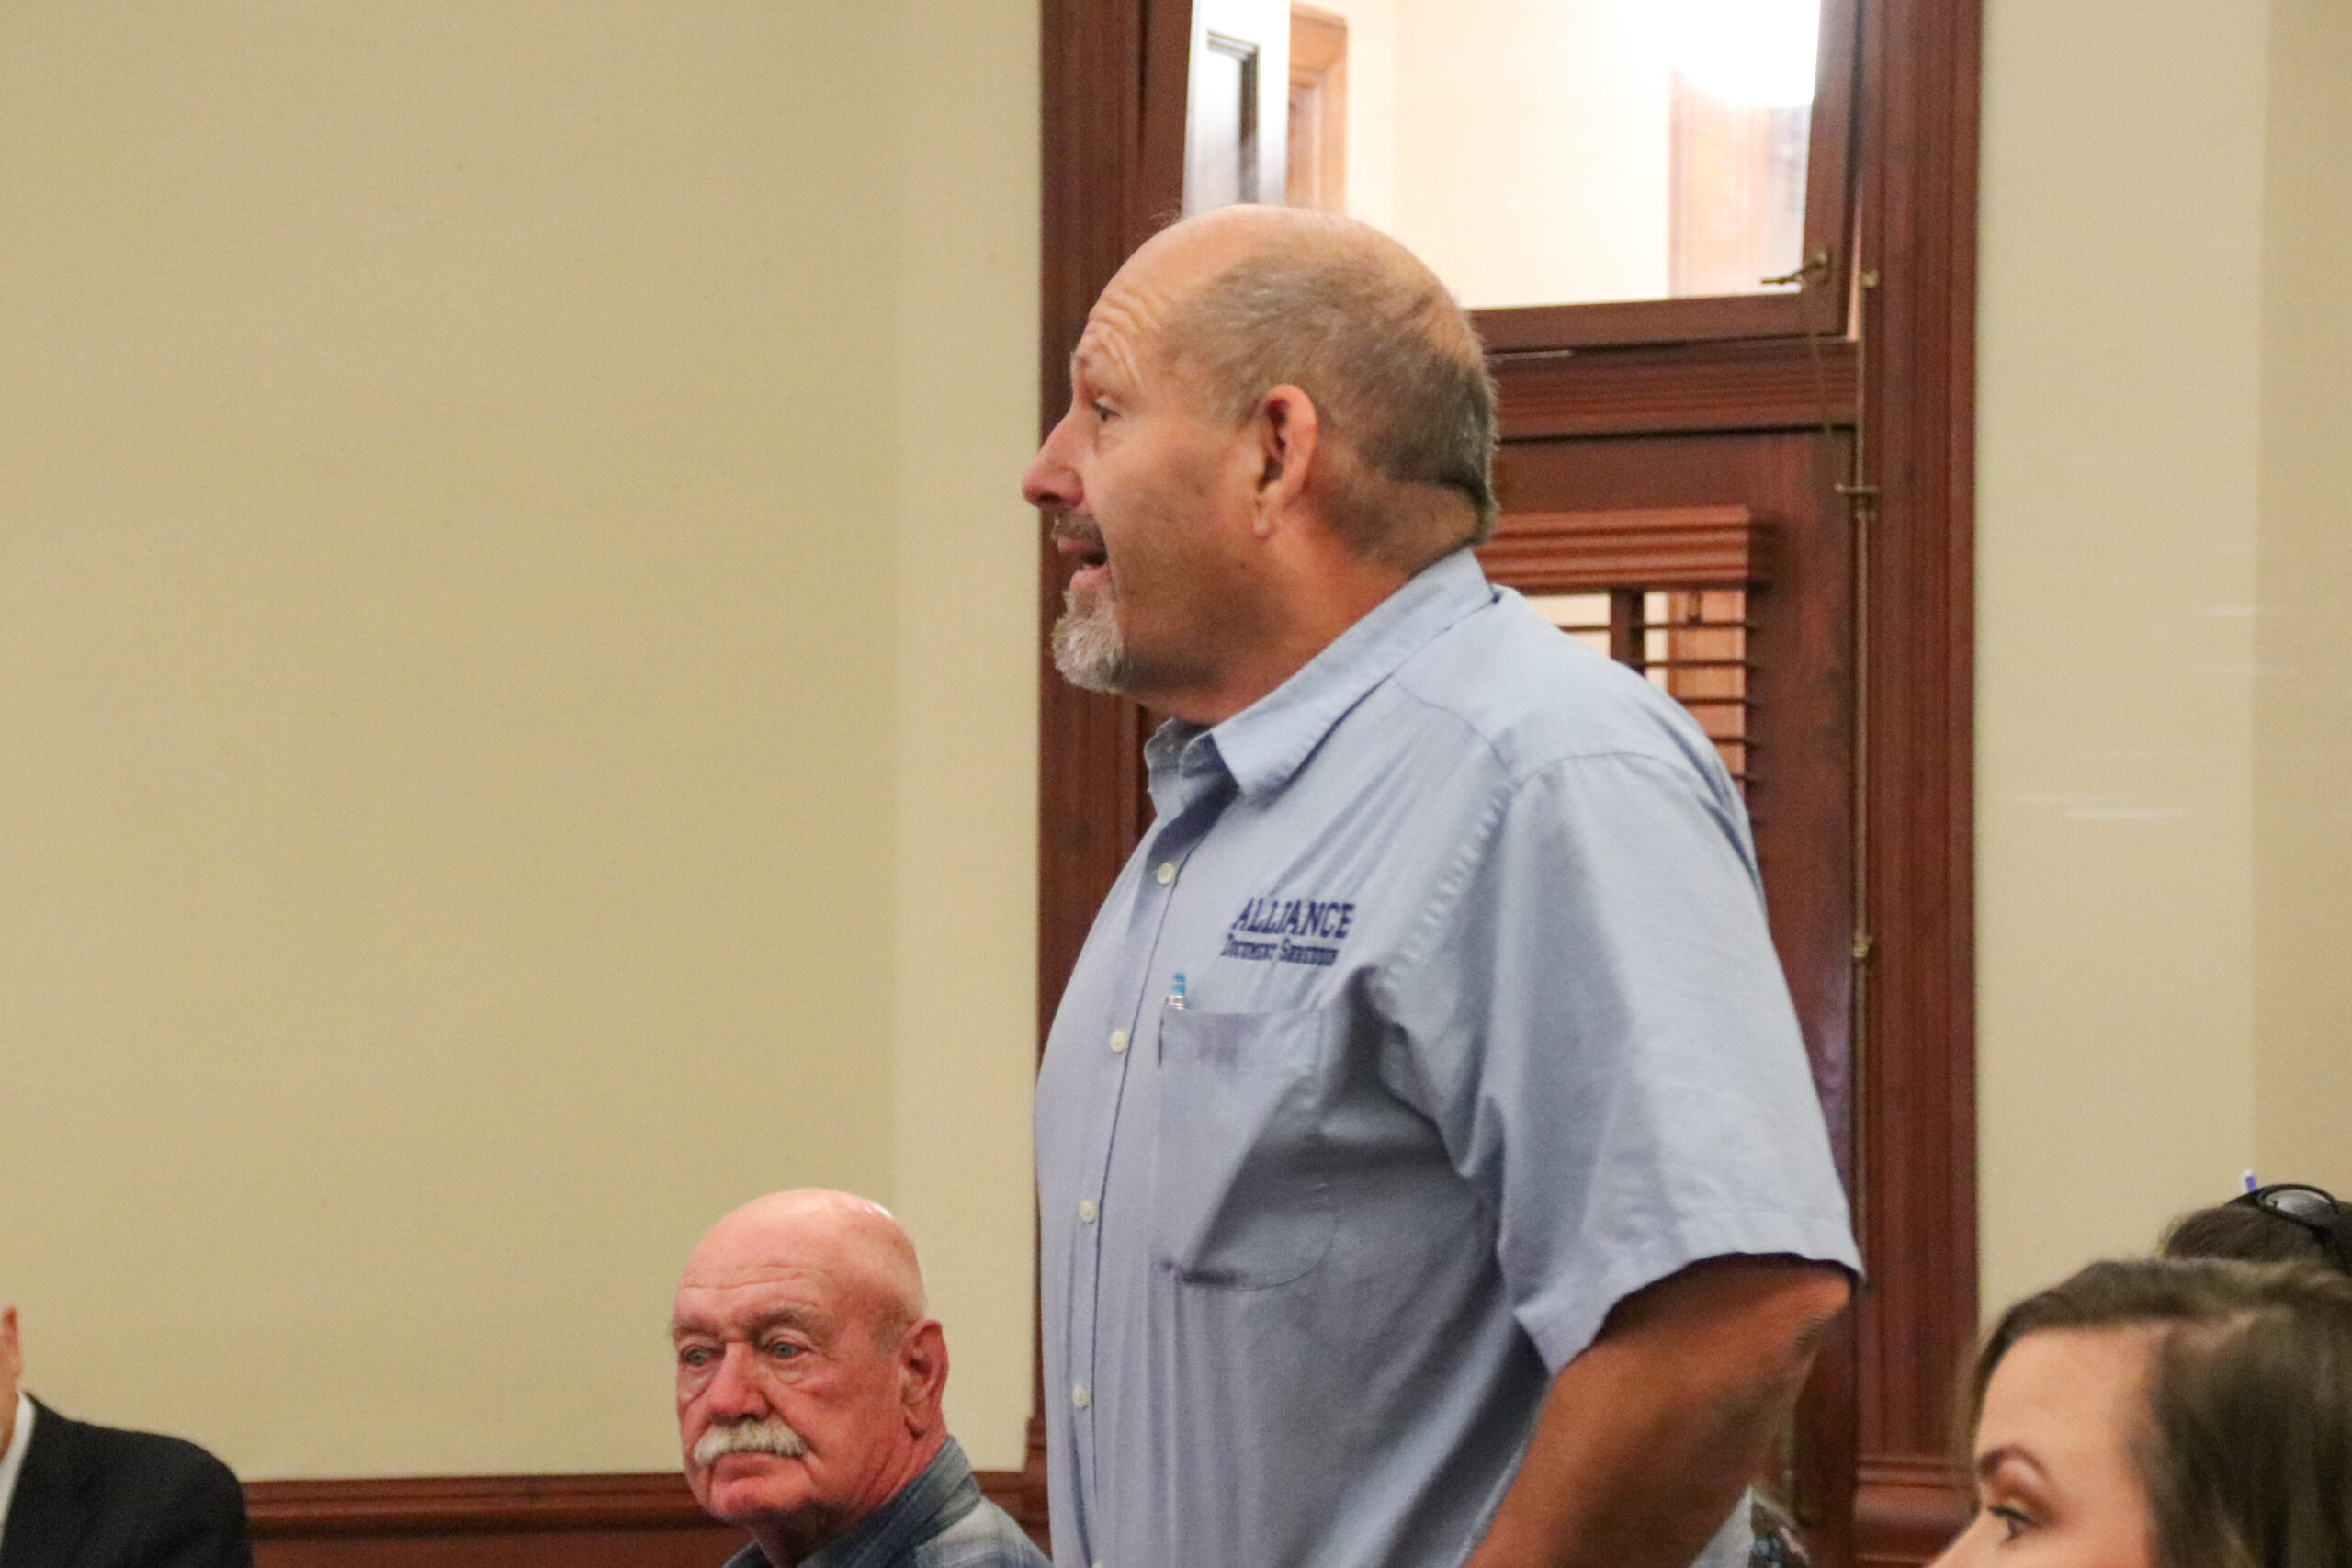 Commissioners hear comments about Arbala VFD, solar